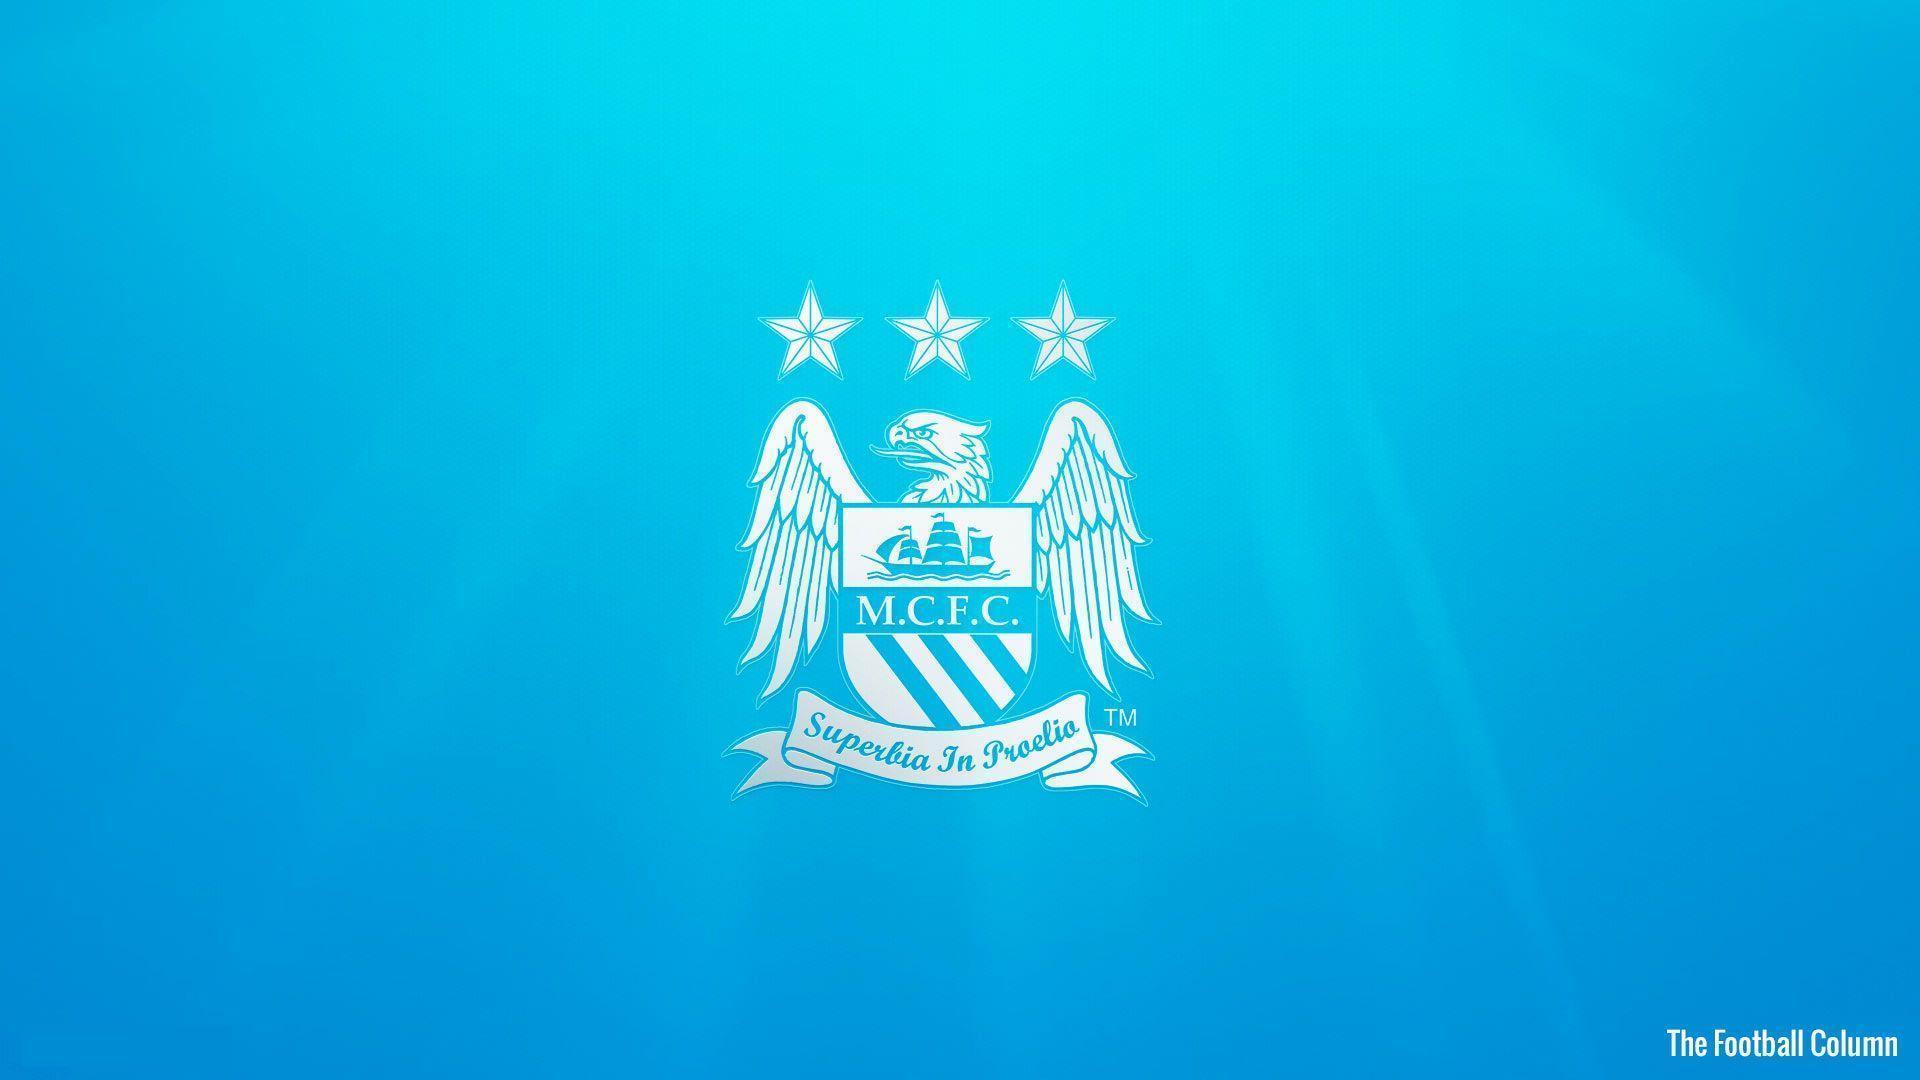 Manchester City F.c. Wallpapers - Wallpaper Cave